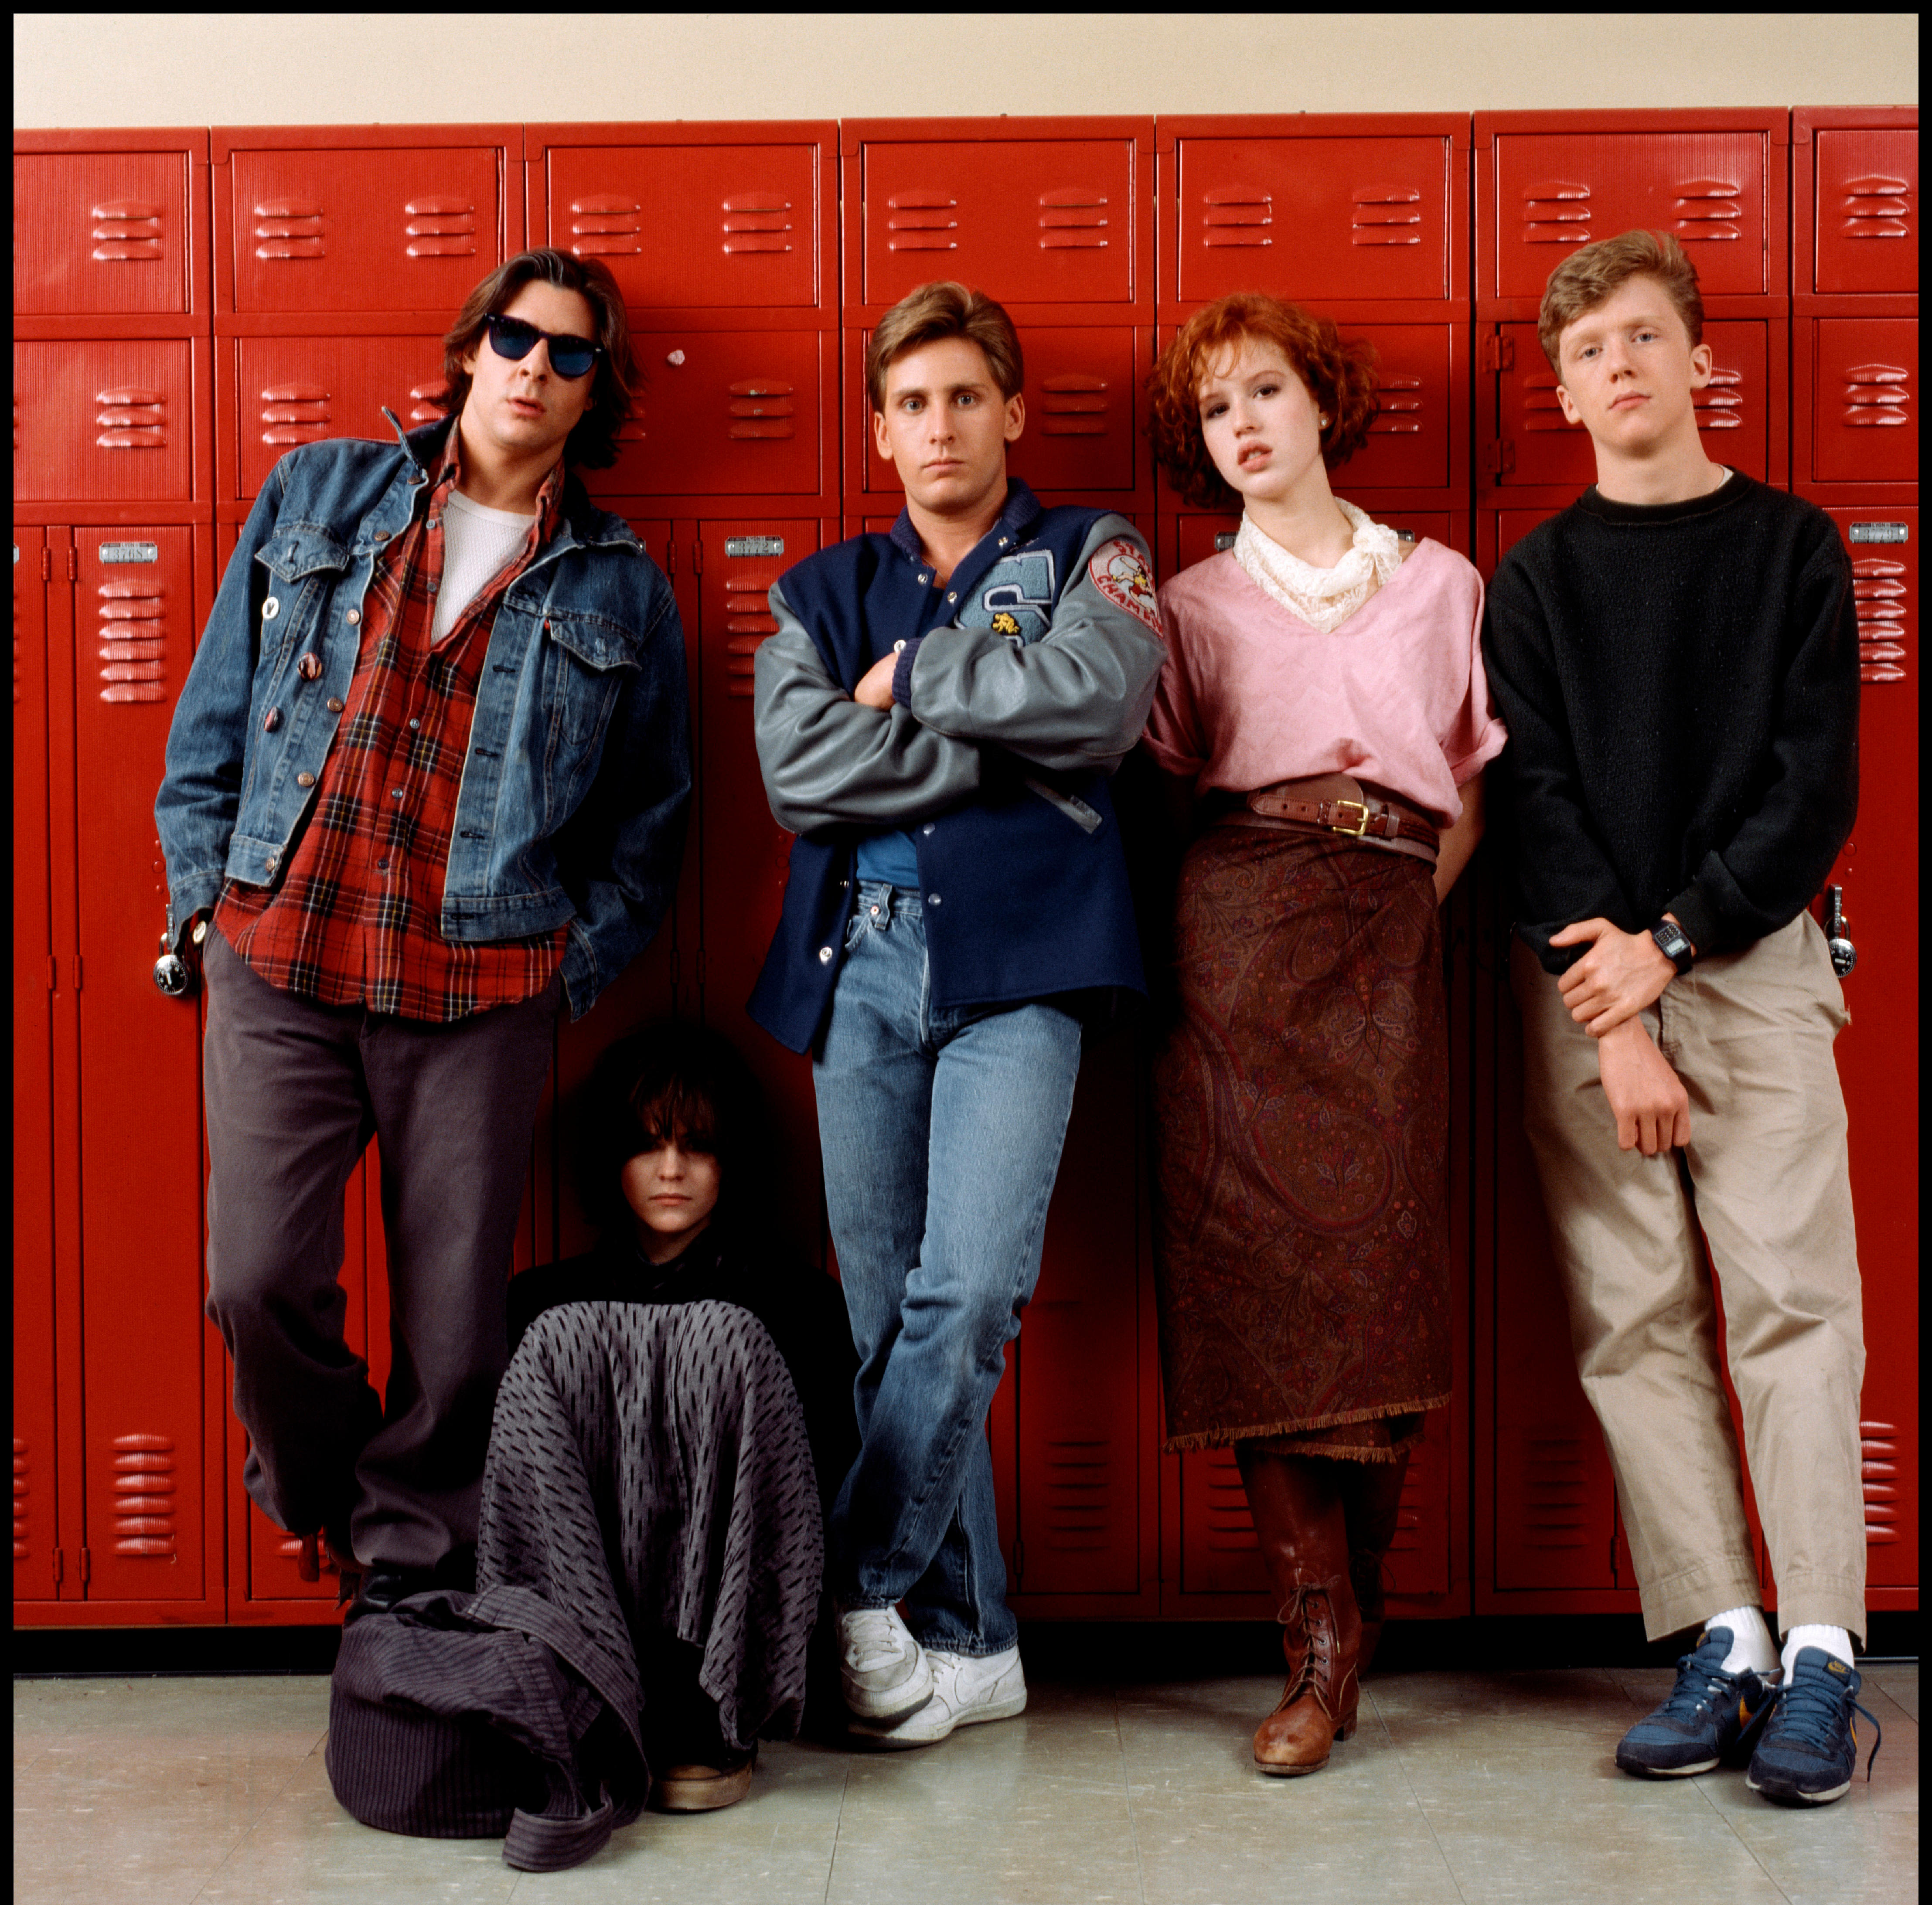 Judd Nelson, Ally Sheedy, Emilio Estevez, Molly Ringwald, and Anthony Michael Hall were in the iconic 1980s movie The Breakfast Club